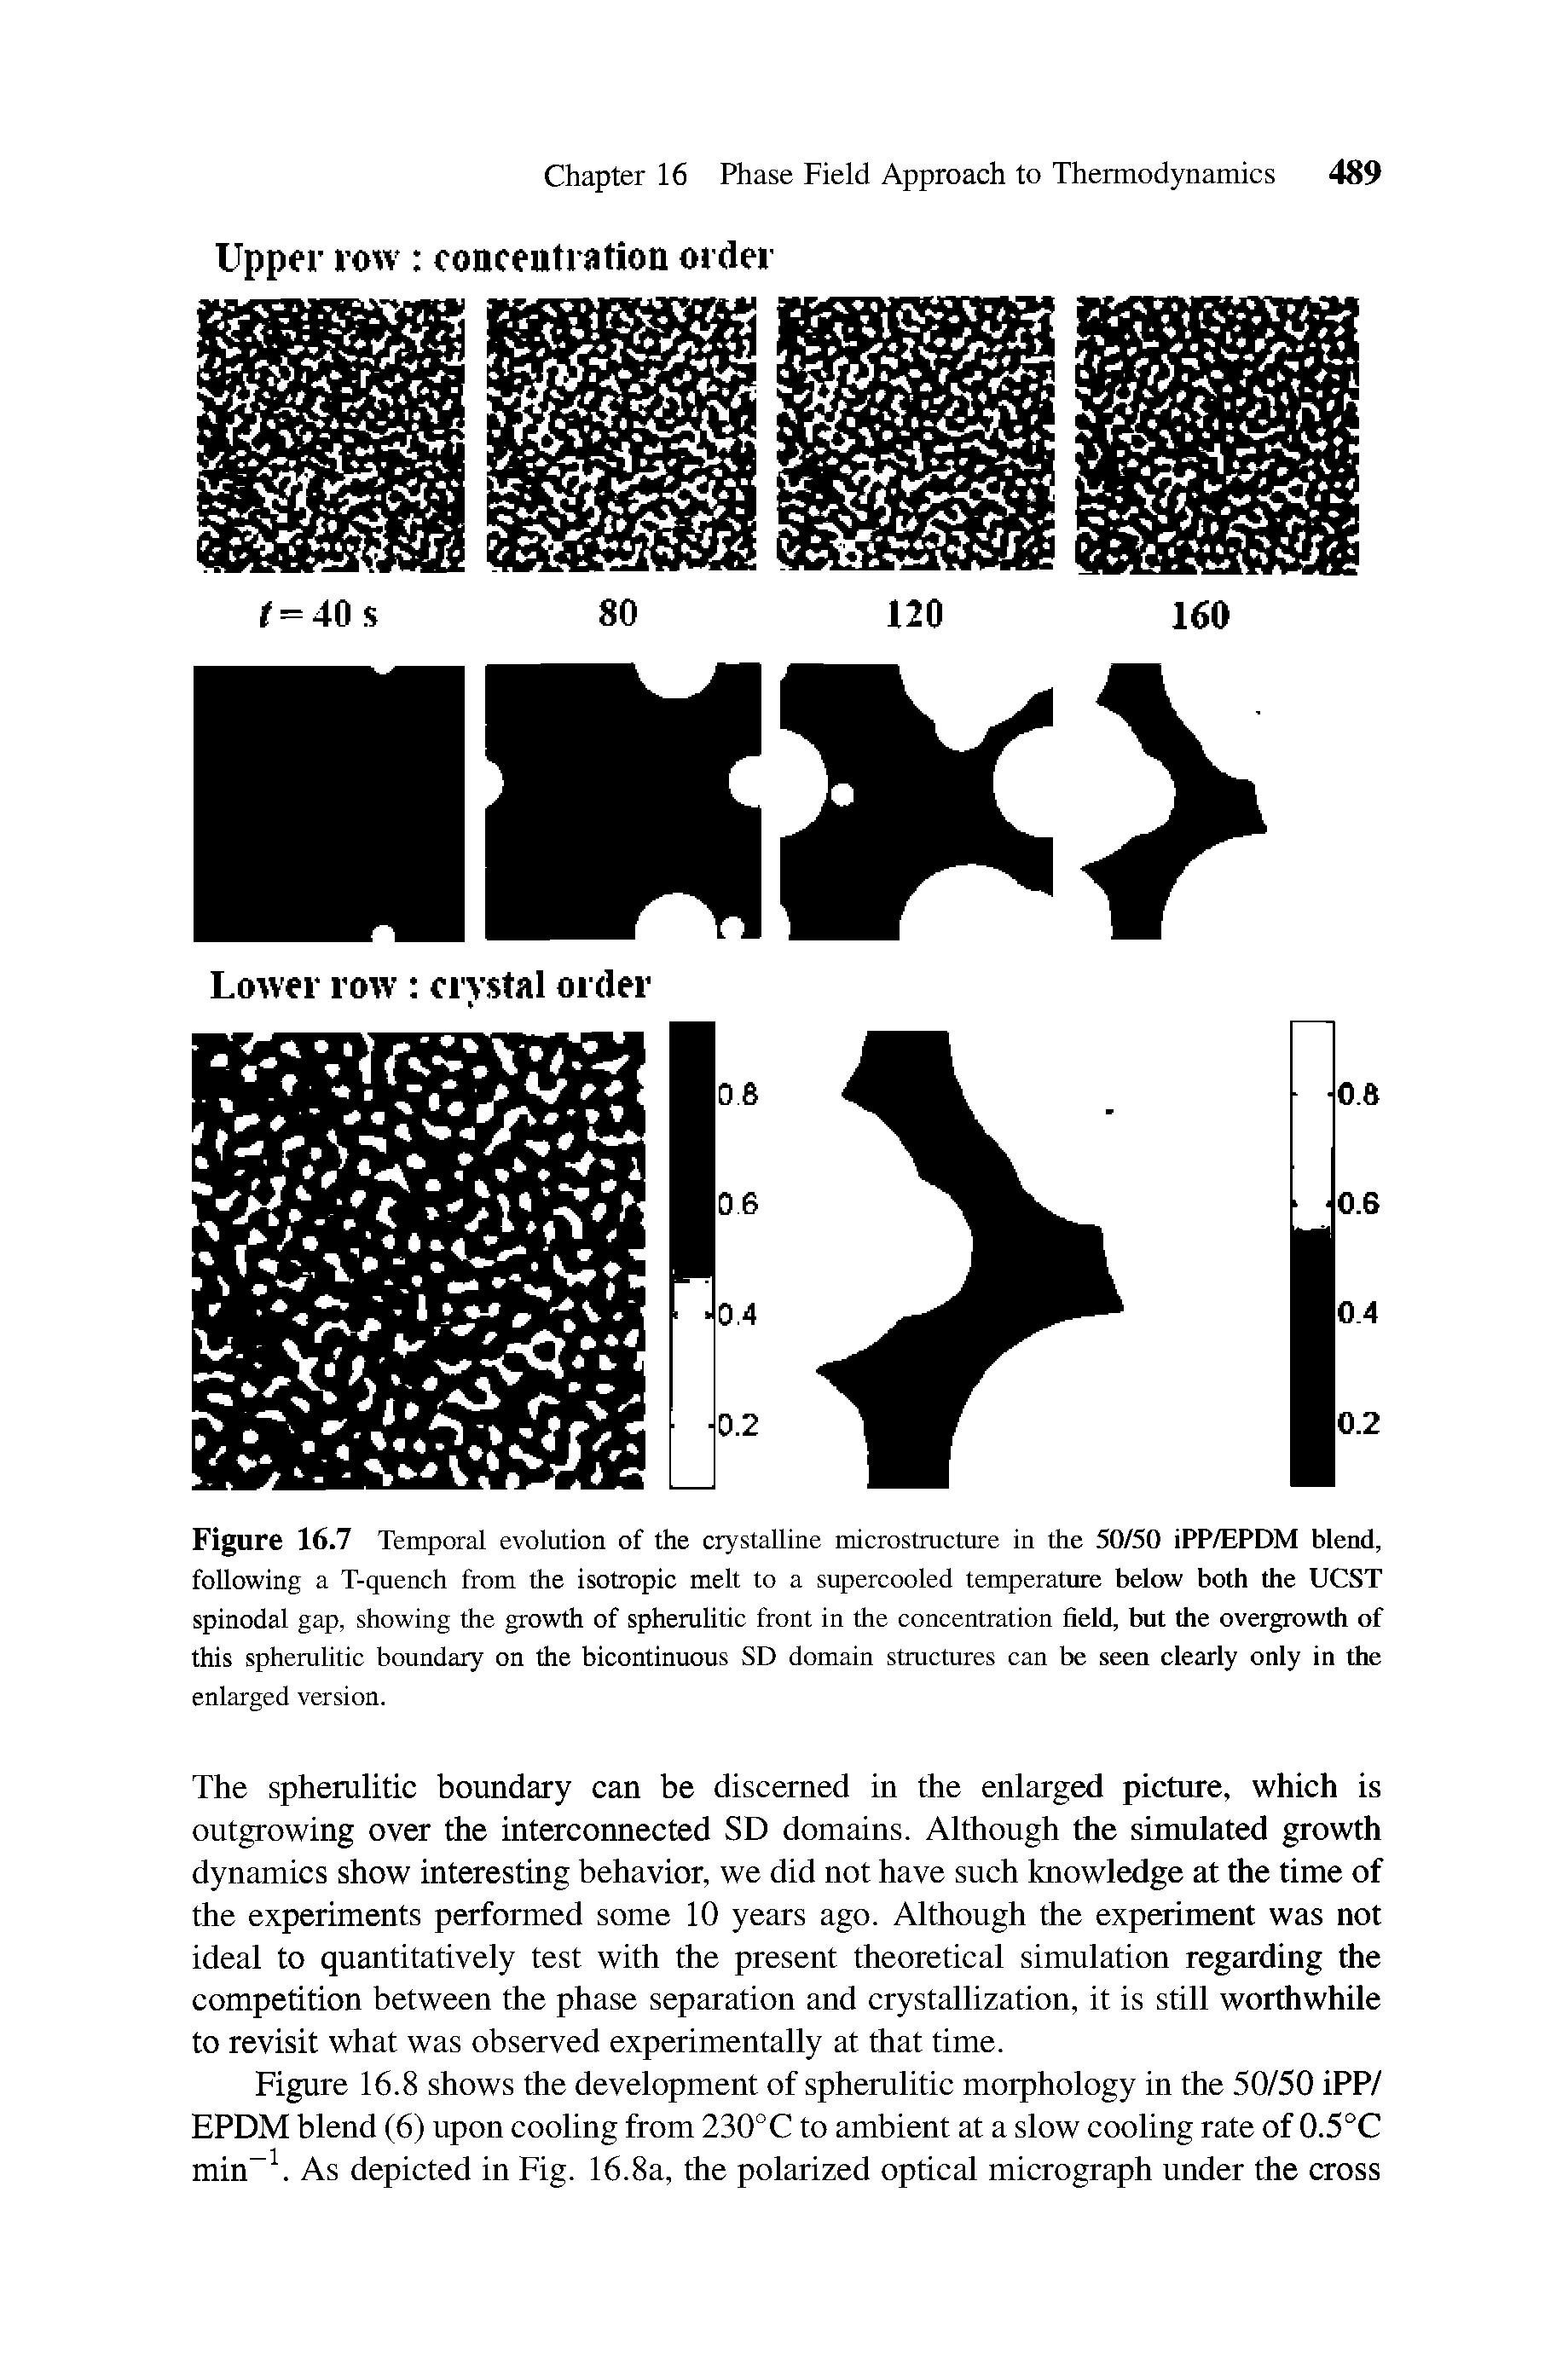 Figure 16.7 Temporal evolution of the crystalline microstructure in the 50/50 iPP/EPDM blend, following a T-quench from the isotropic melt to a supercooled temperature below both the UCST spinodal gap, showing the growth of spherulitic front in the concentration field, but the overgrowth of this spherulitic boundary on the bicontinuous SD domain structures can be seen clearly only in the enlarged version.